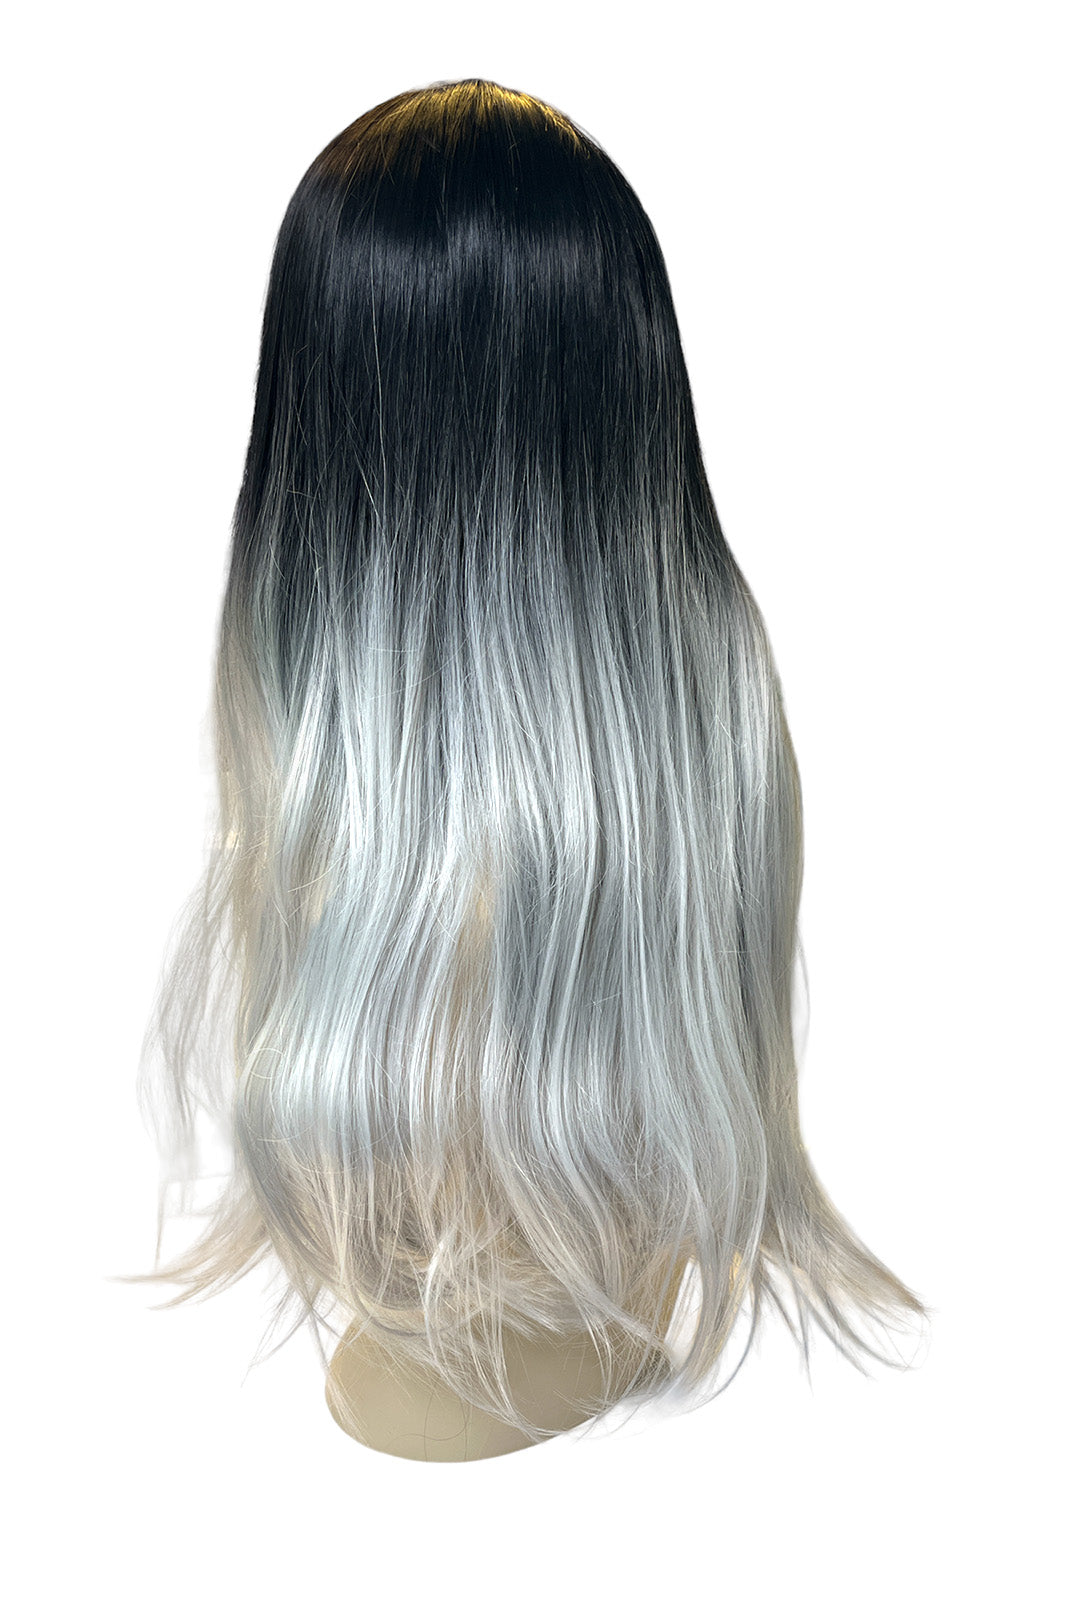 Deluxe Long Straight Black to Platinum Silver Ombre Wig